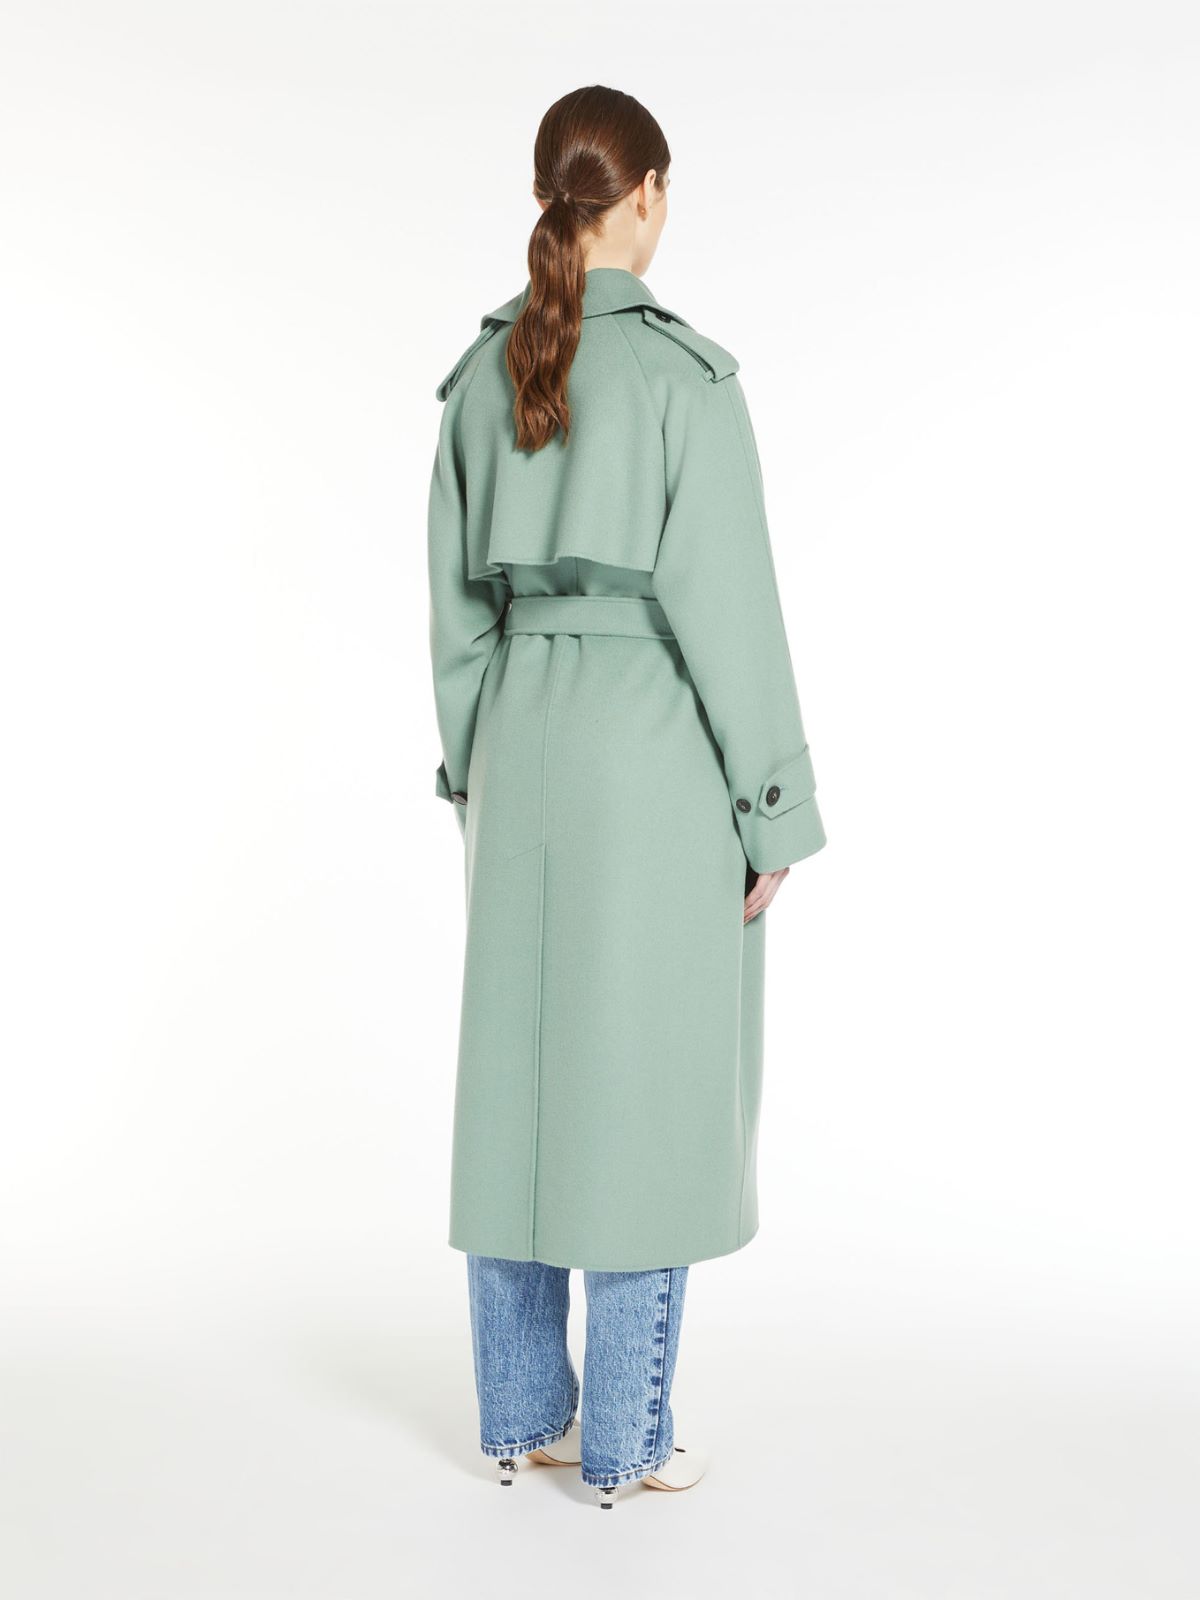 Double-breasted trench coat, sage green | Weekend Max Mara